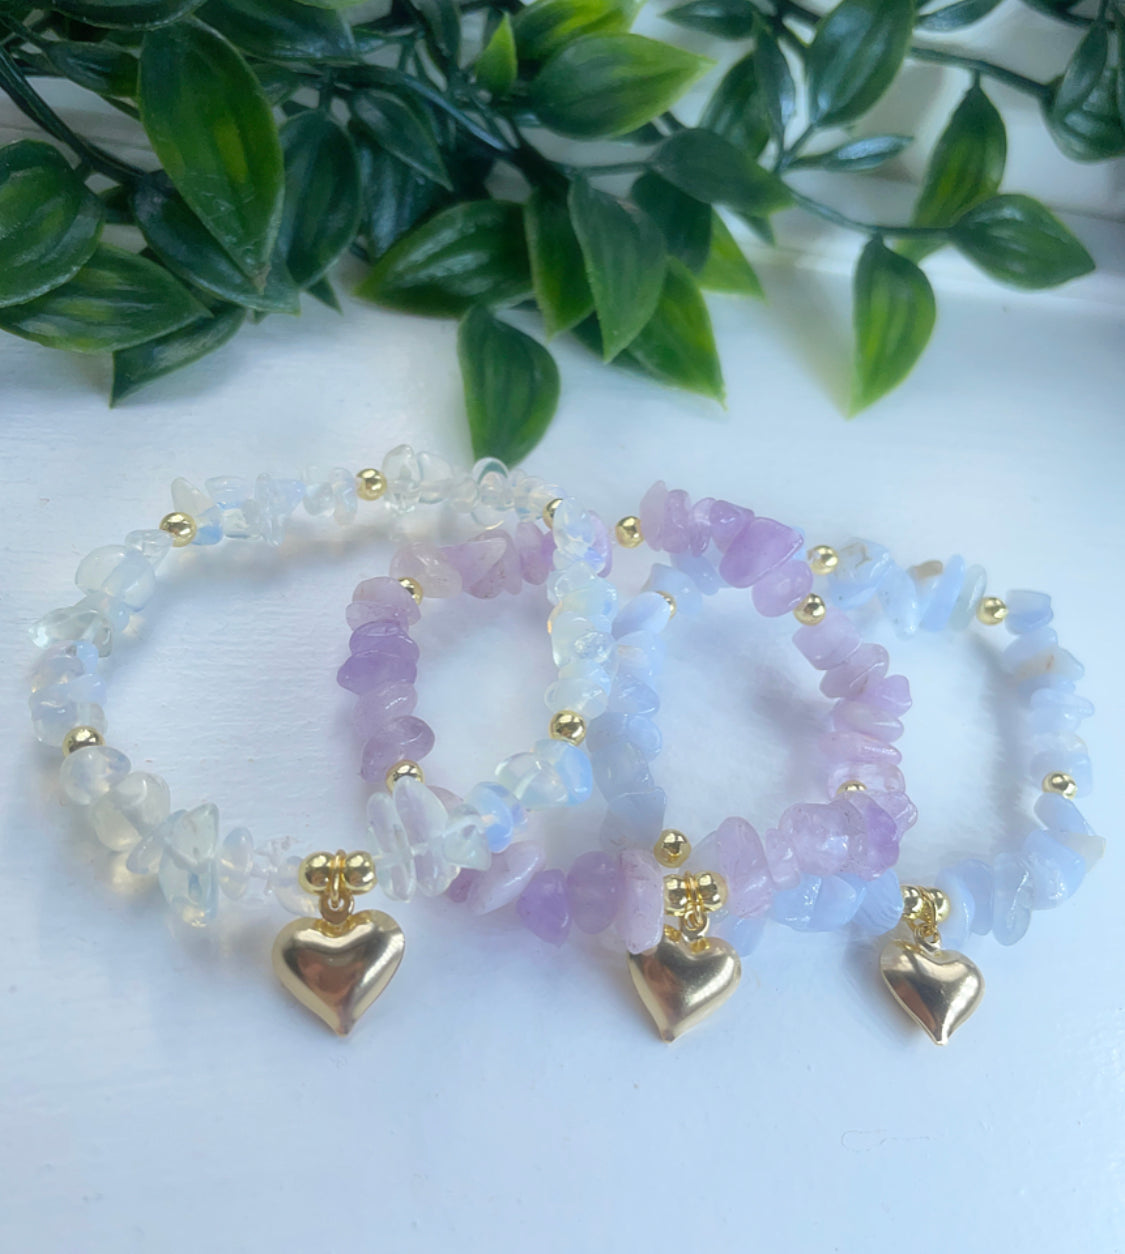 Crystal gold heart charm bracelets featuring stunning blue lace agate, opal and lilac amethyst